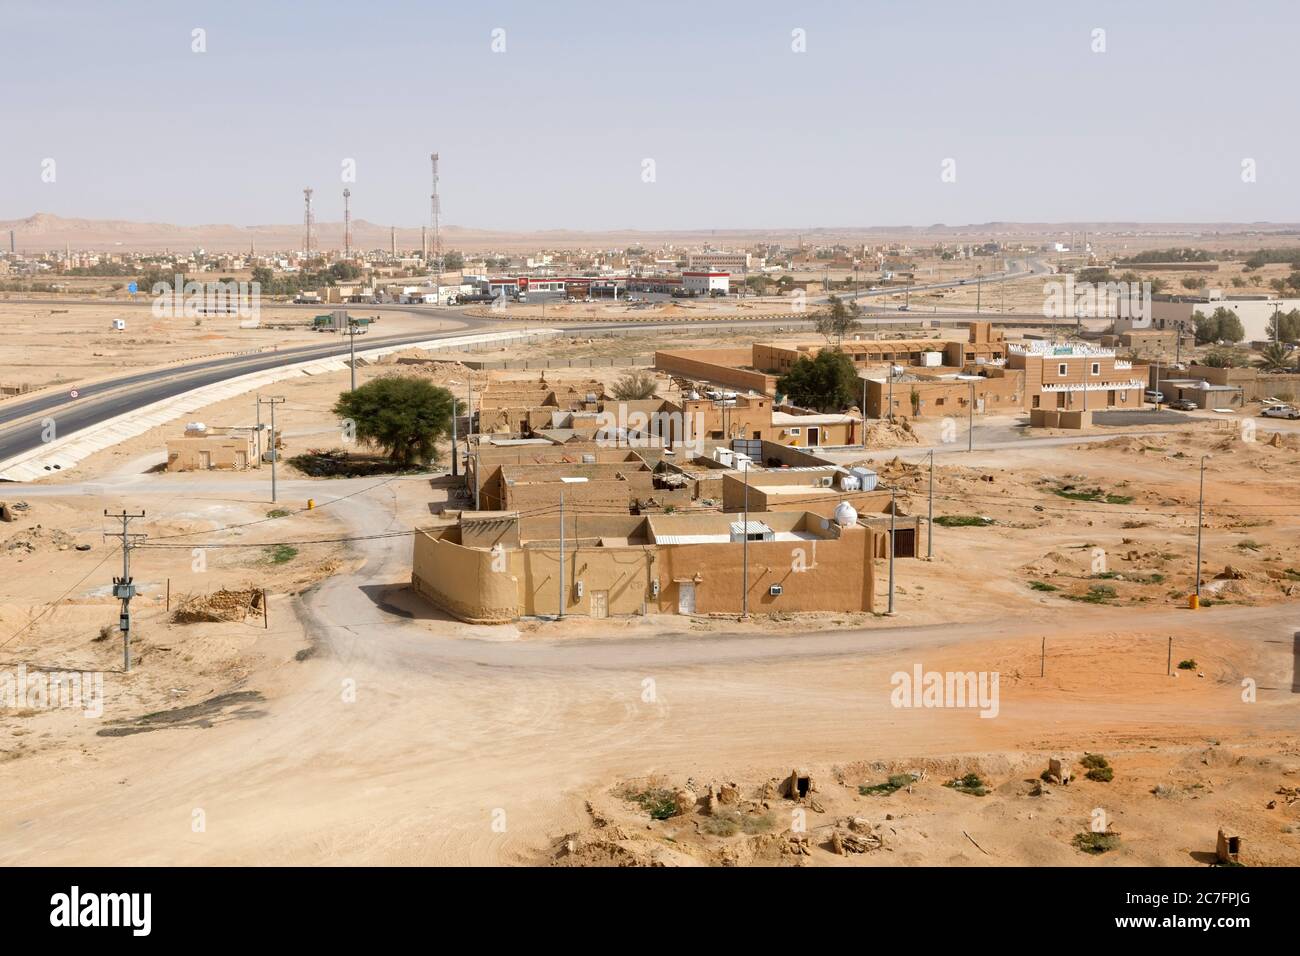 View of the small village Raghba in the middle of the desert in Saudi Arabia Stock Photo